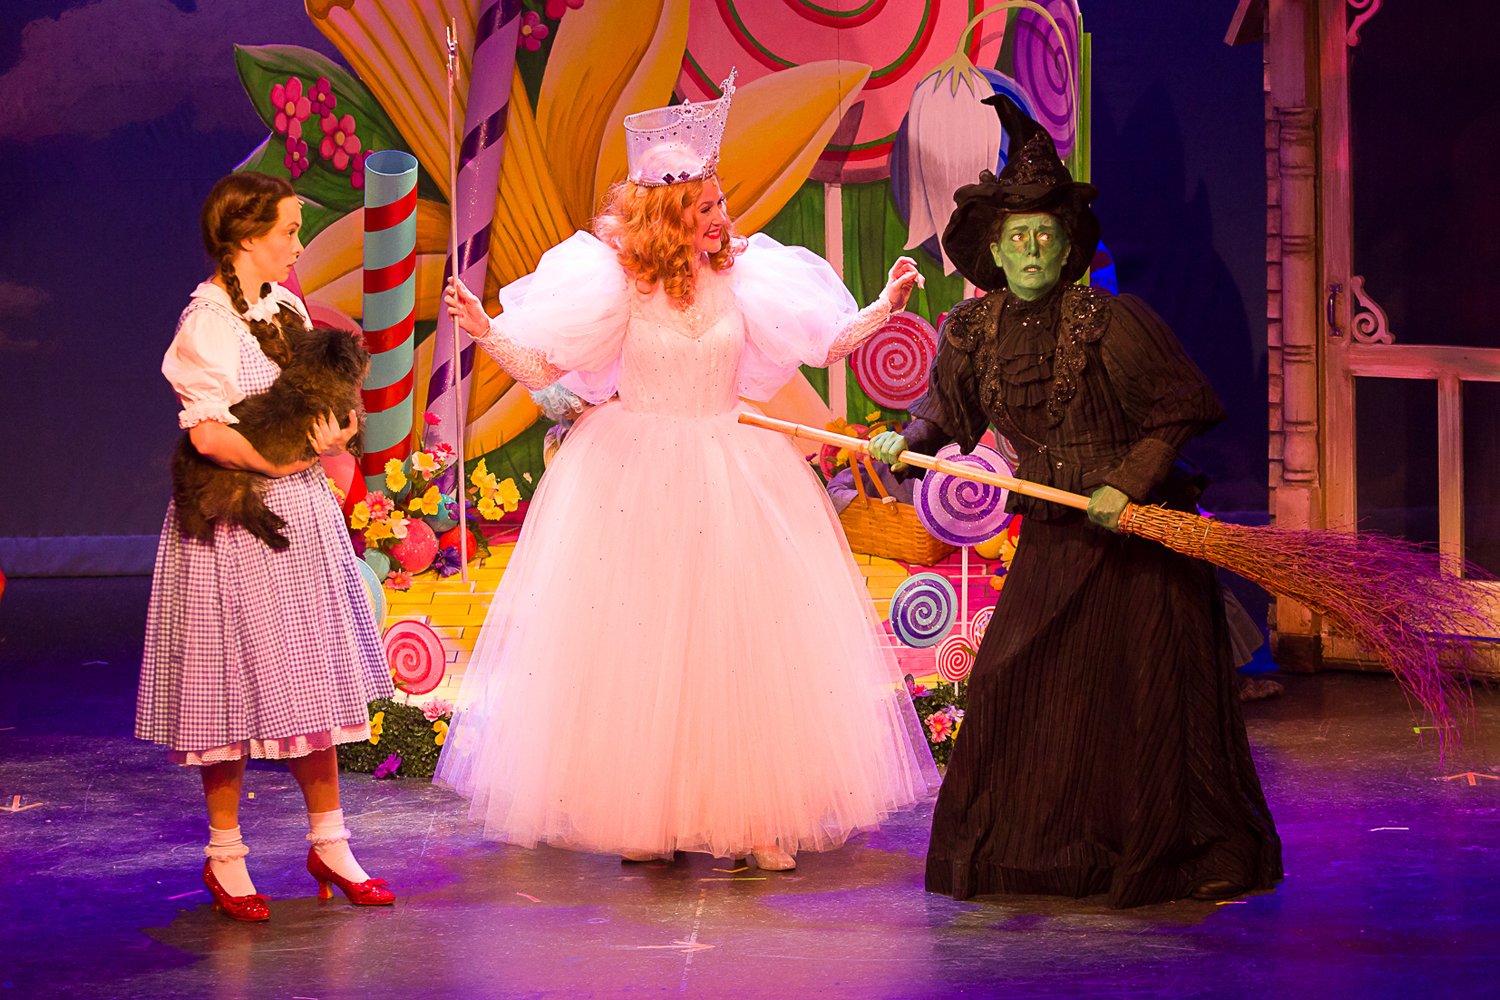 THE WIZARD OF OZ - Theatre By The Sea